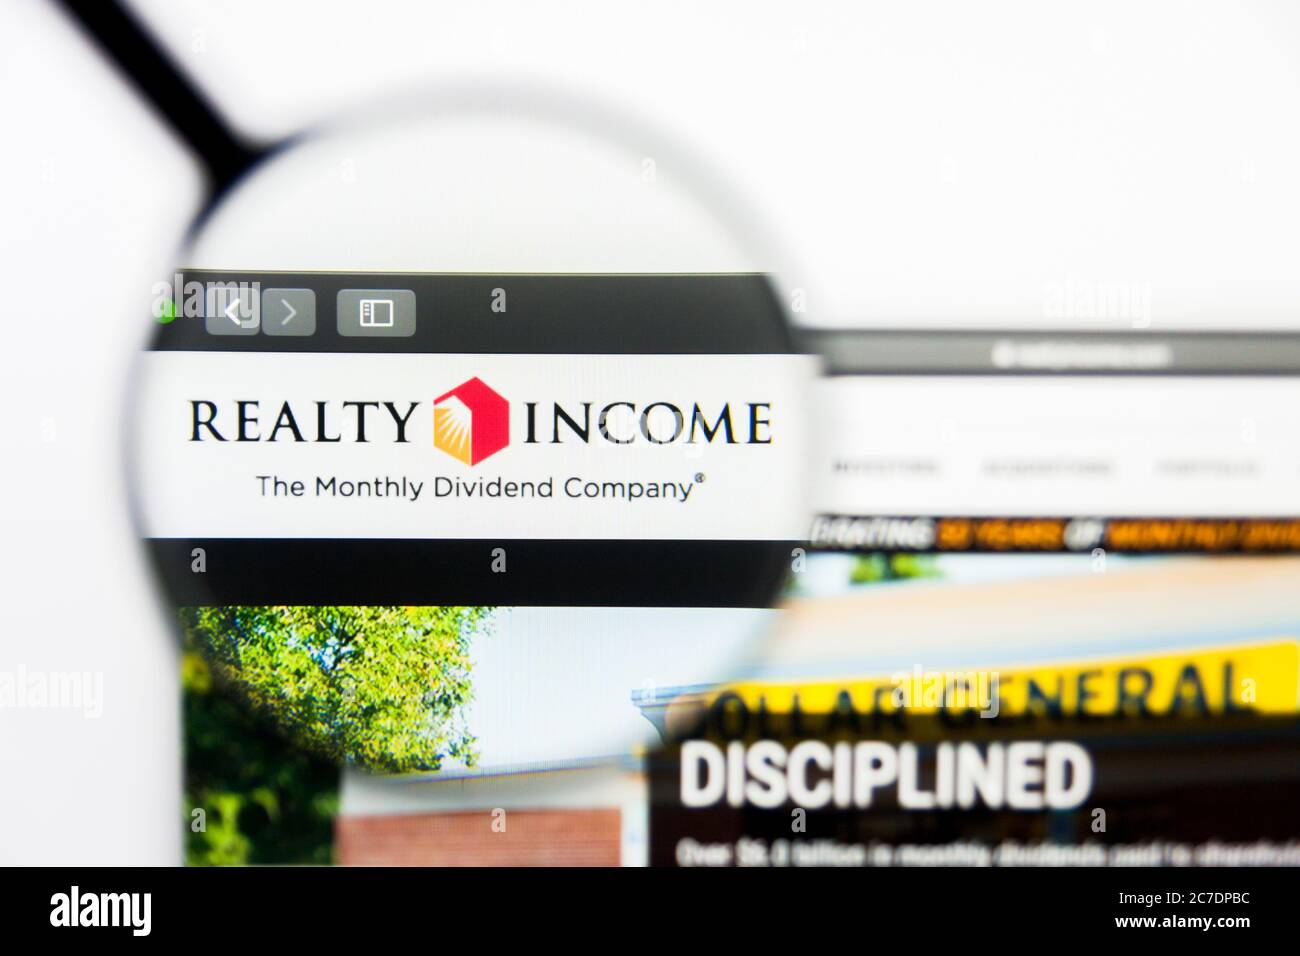 Los Angeles, California, USA - 25 March 2019: Illustrative Editorial of Realty Income website homepage. Realty Income logo visible on display screen. Stock Photo